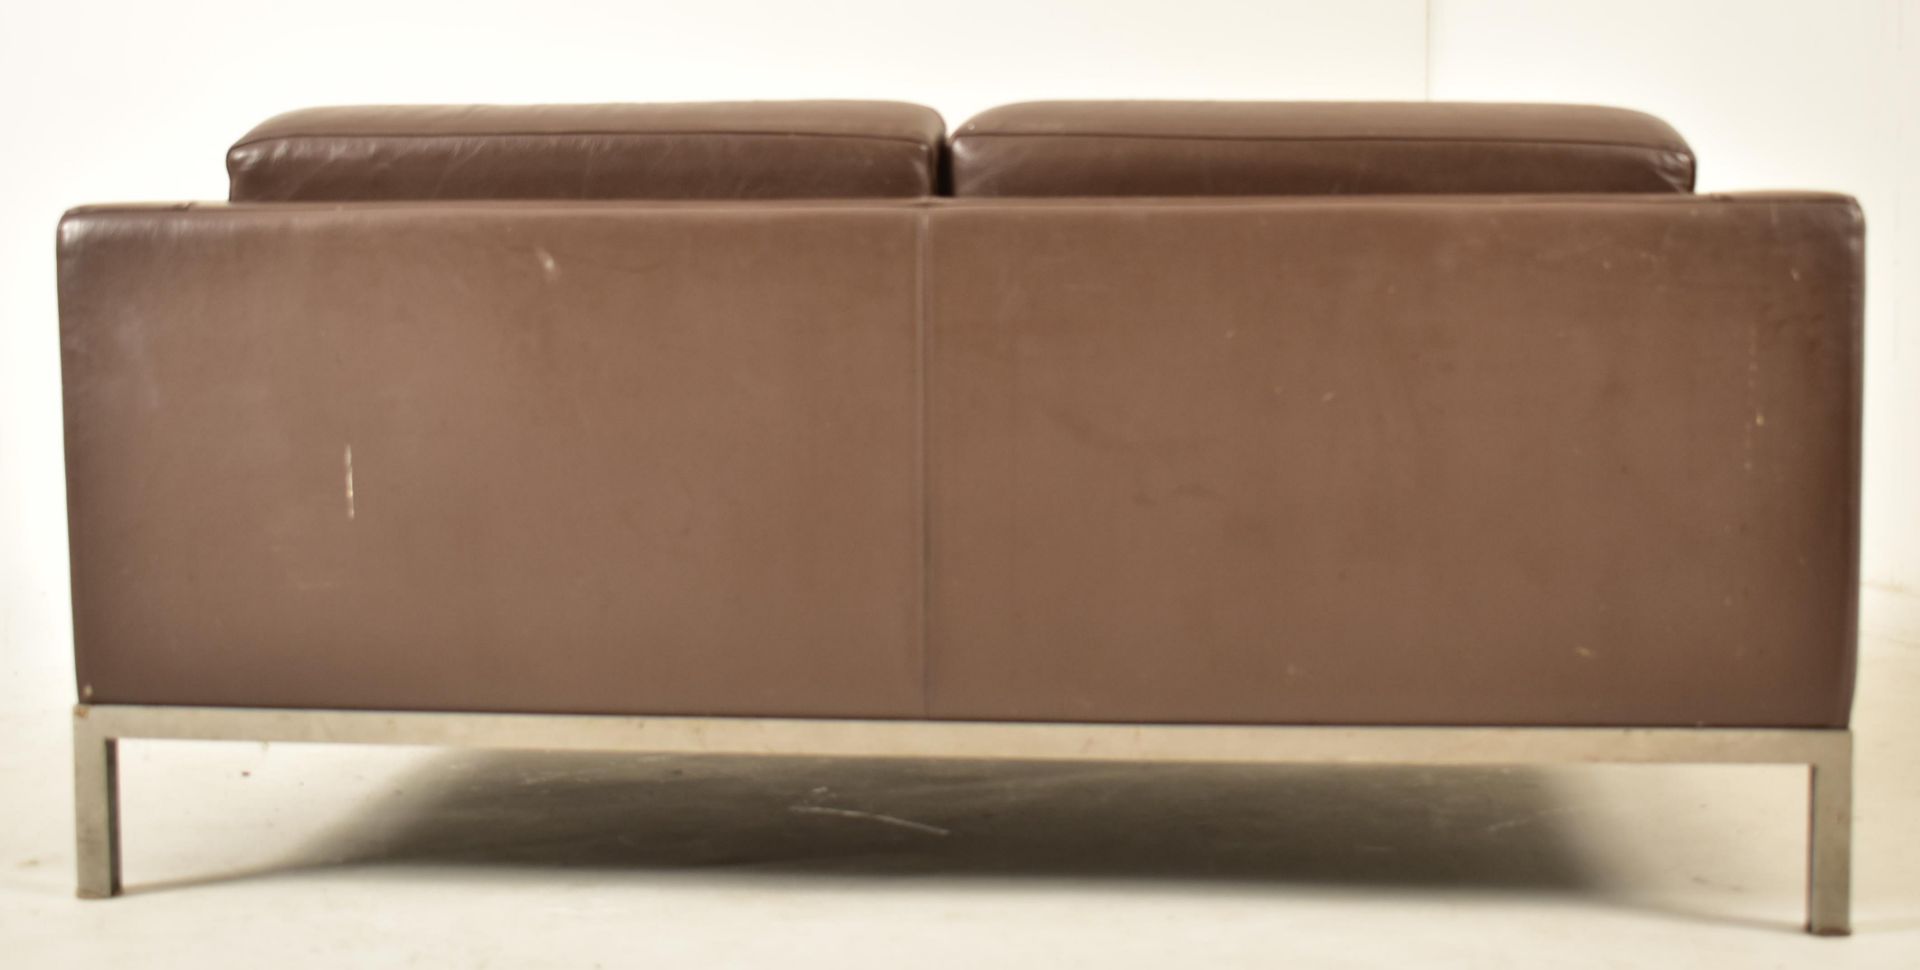 FLORENCE KNOLL STYLE - DESIGNER TWO SEATER SOFA SETTEE - Image 3 of 4